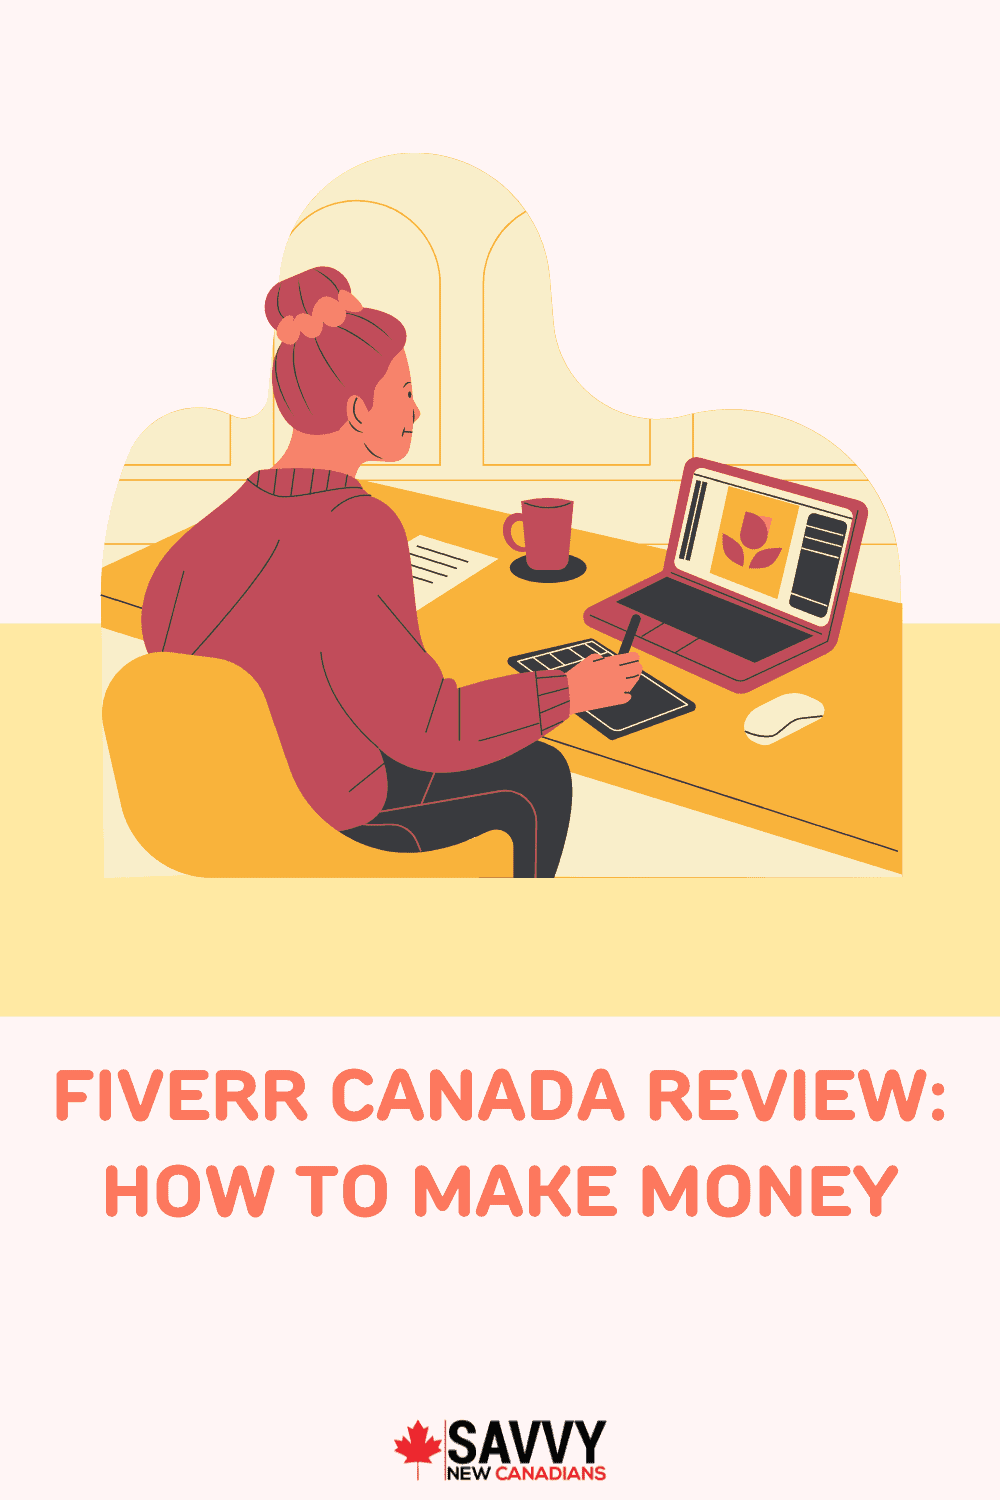 Fiverr Canada: How To Make Money on Fiverr in 2022